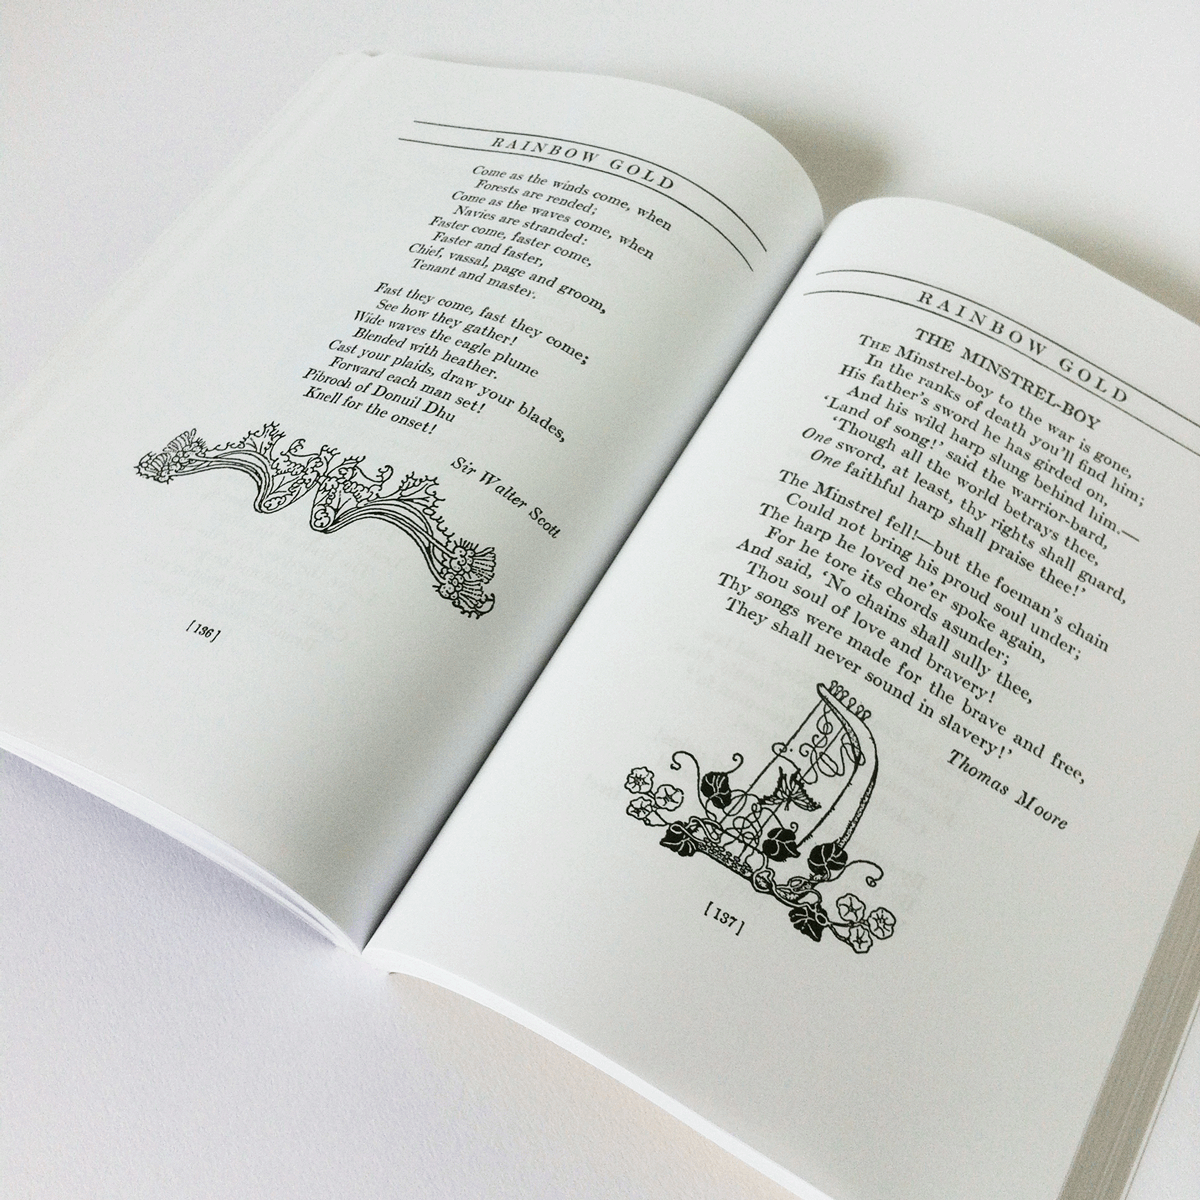 Poem's by Sir Walter Scott and Thomas Moore, illustrated by Dugald Stewart Walker. Rainbow Gold Book.